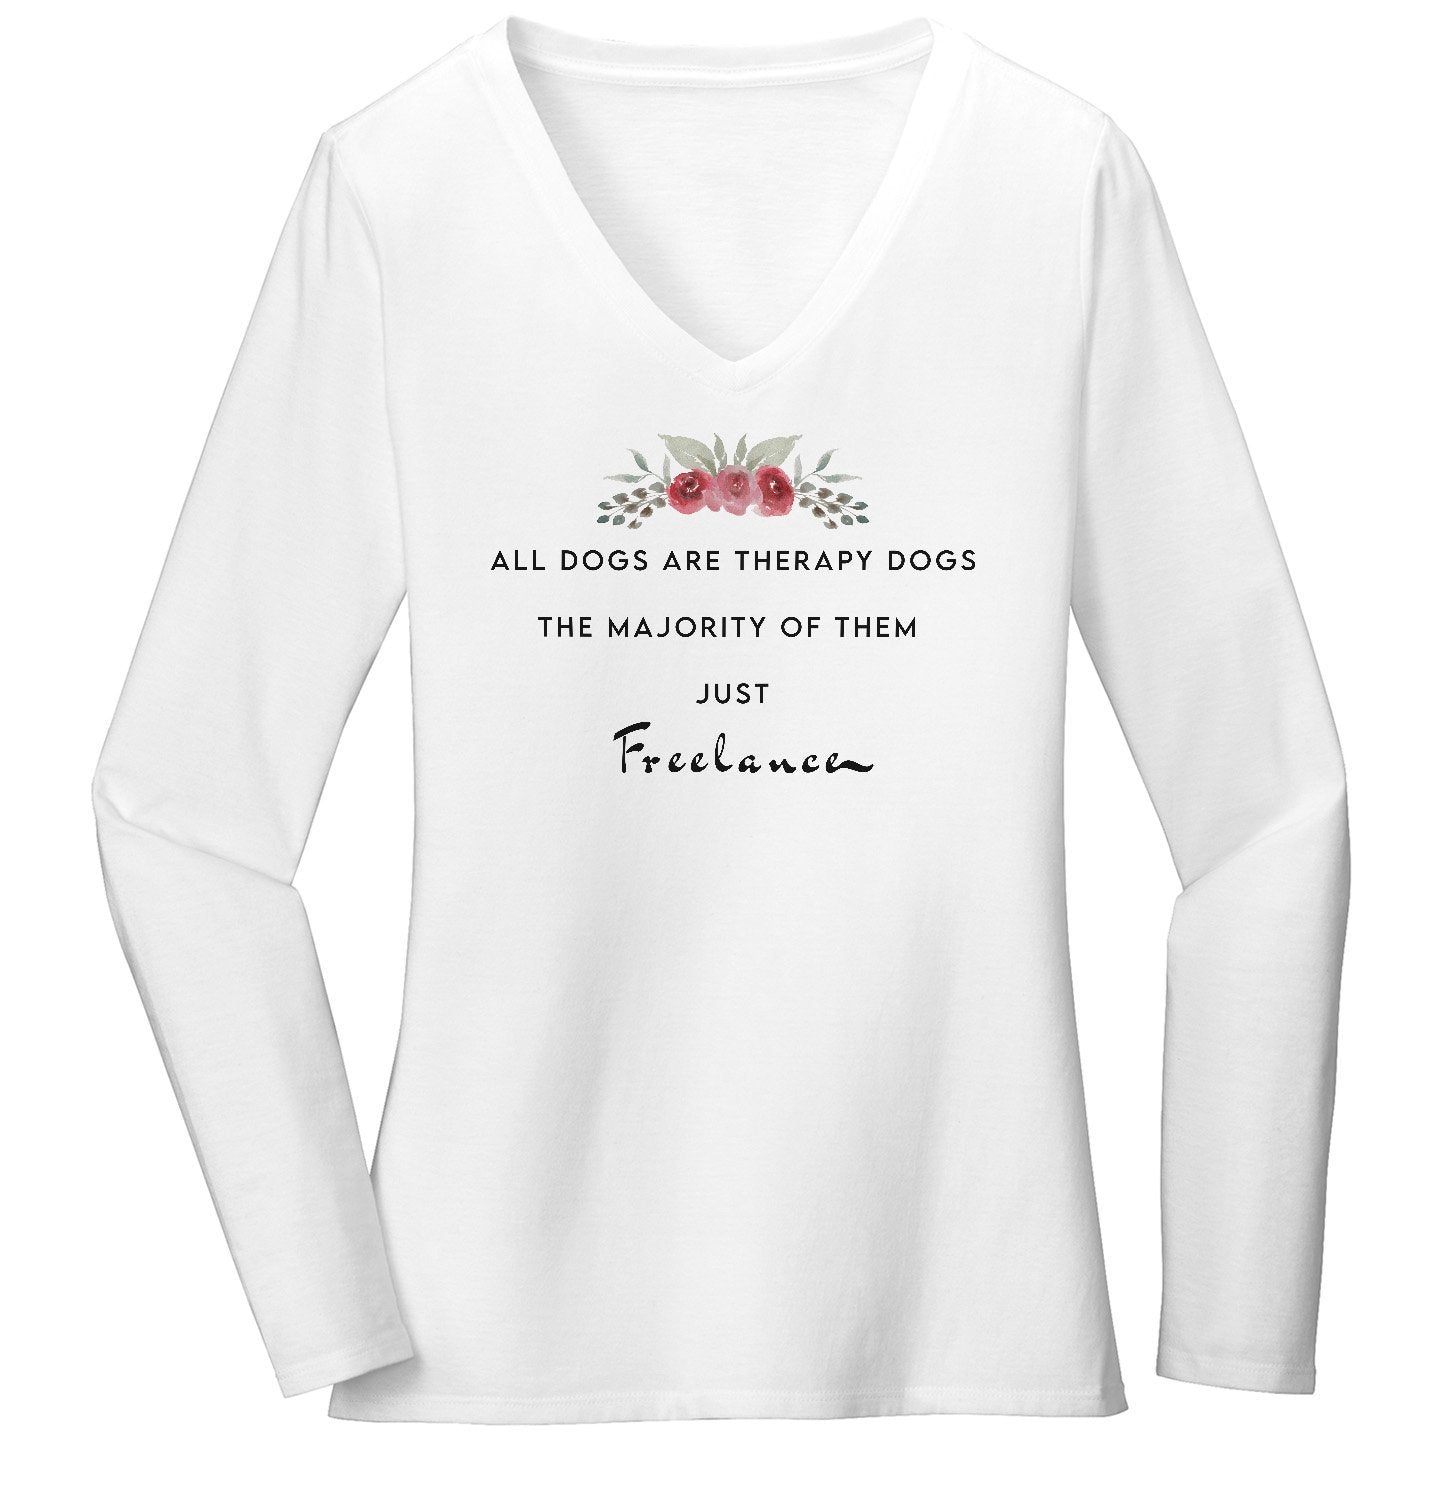 Therapy Dogs Freelance - Women's V-Neck Long Sleeve T-Shirt